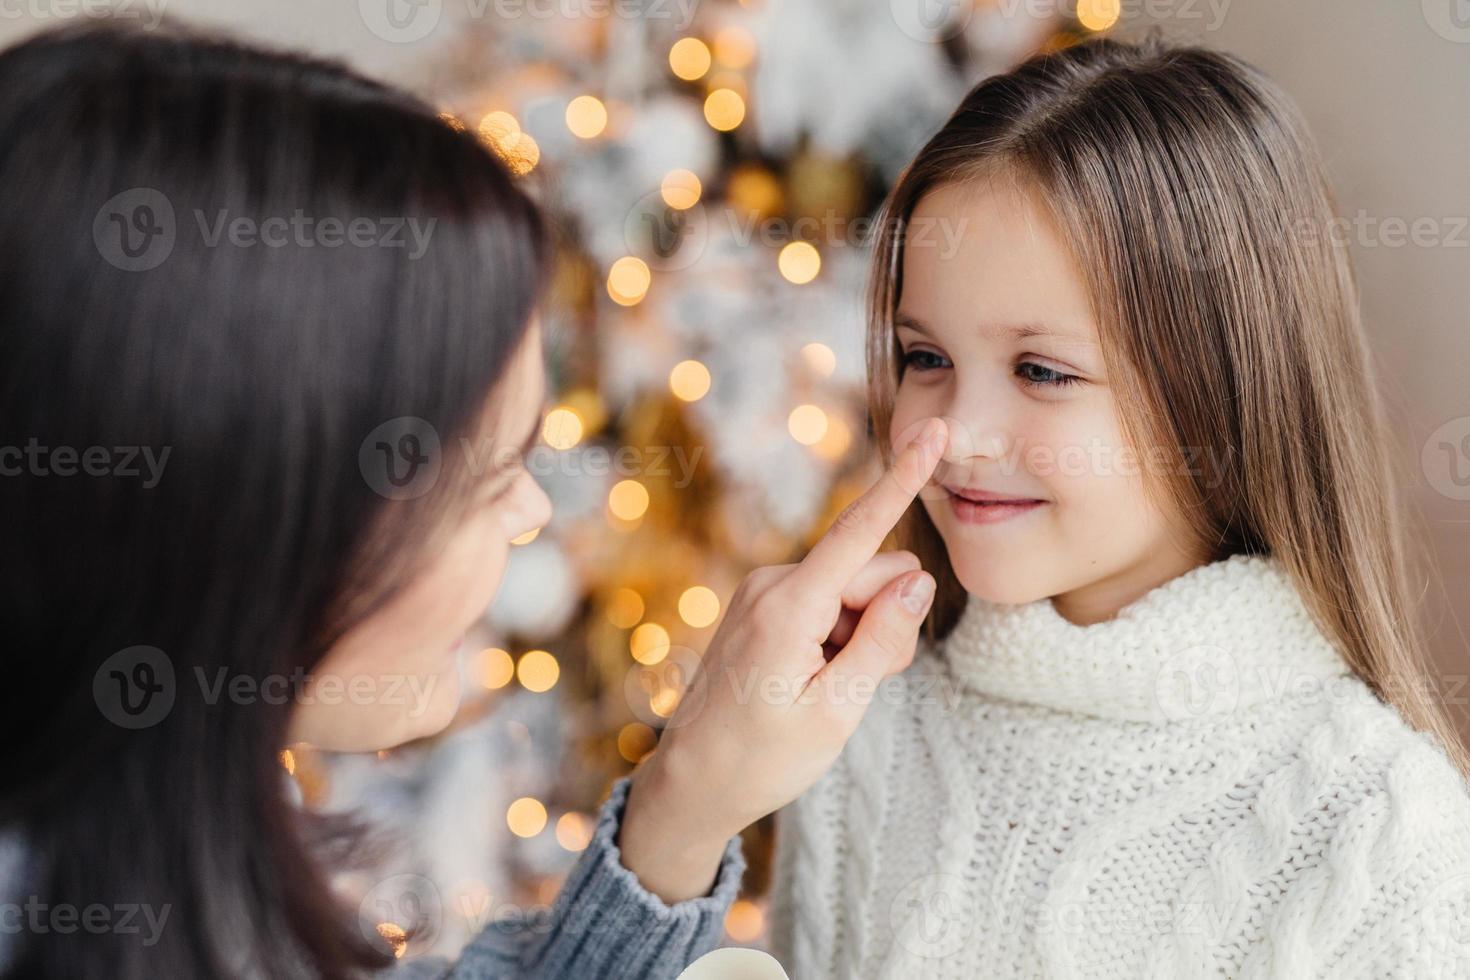 Close up portrait of beautiful little girl with long hair, has fun with her mother, looks in eyes, stand together against decorated fir tree with garlands and lights background. Celebration concept photo